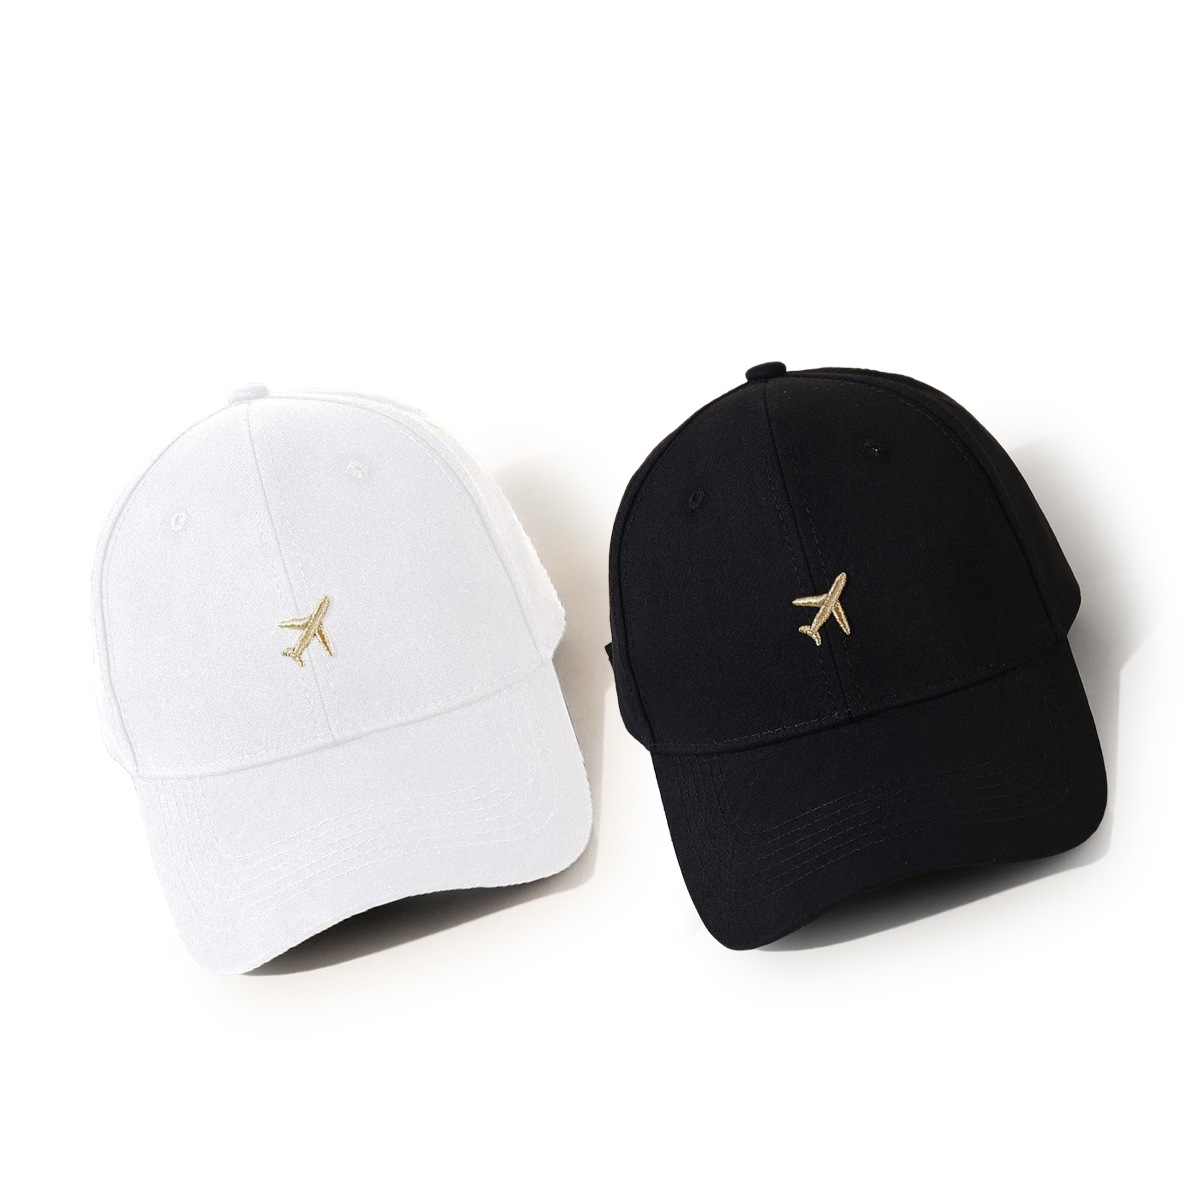 Hot Selling Hat Womens KoreanStyle Fashionable SunProof Embroidered Aircraft Baseball Cap Japanese Style FaceLooking Little Wild Peaked Cap Menpicture3